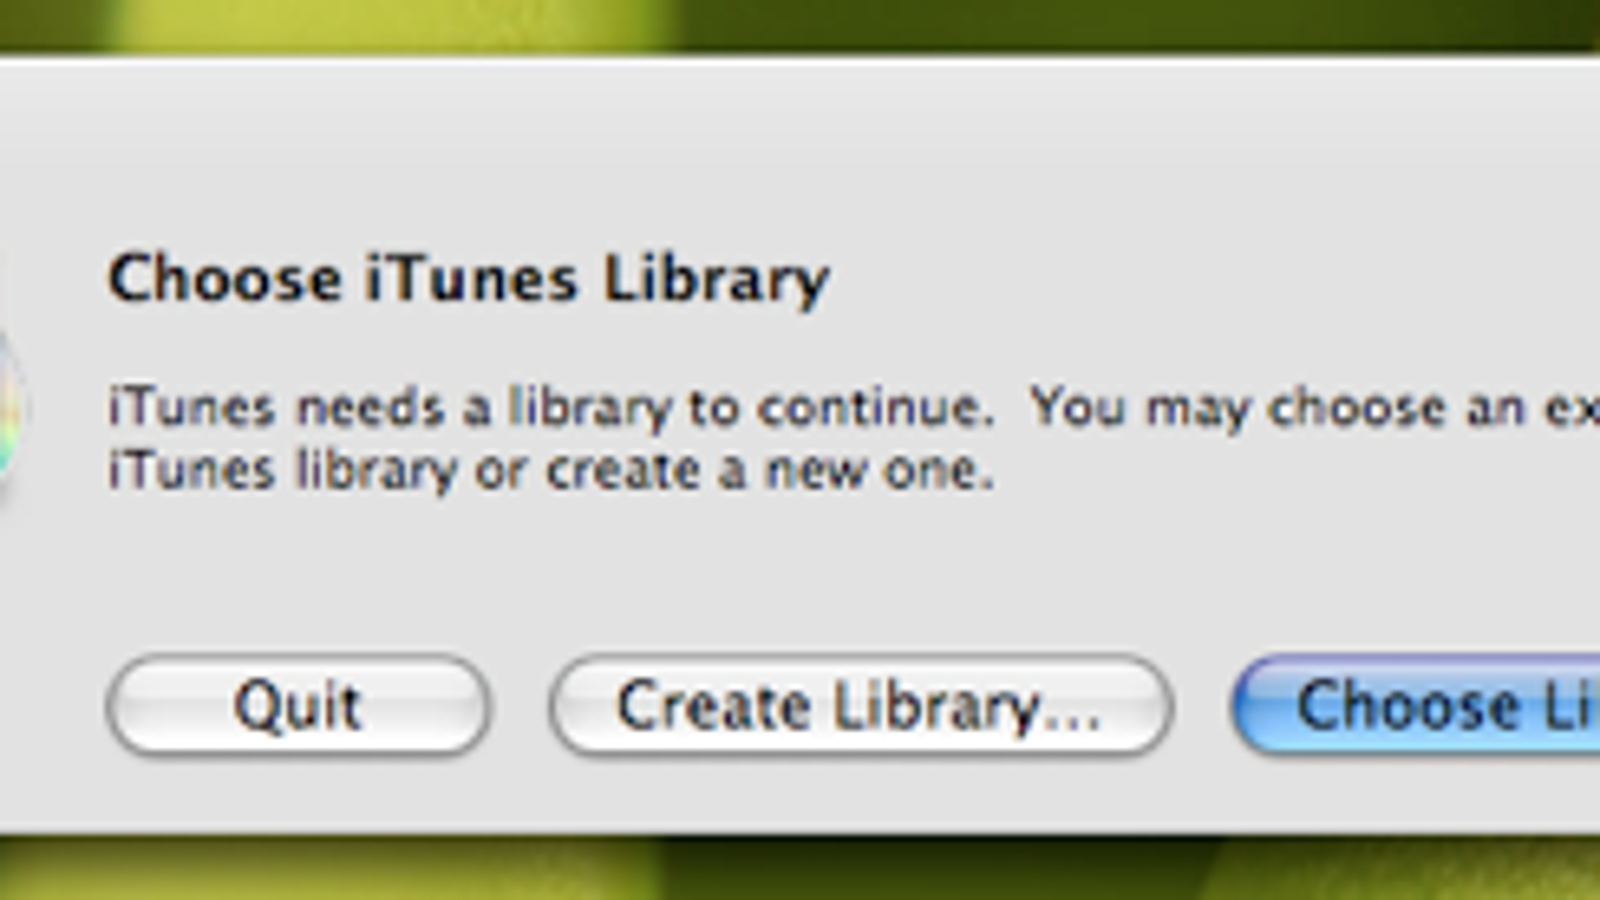 smart itunes library manager